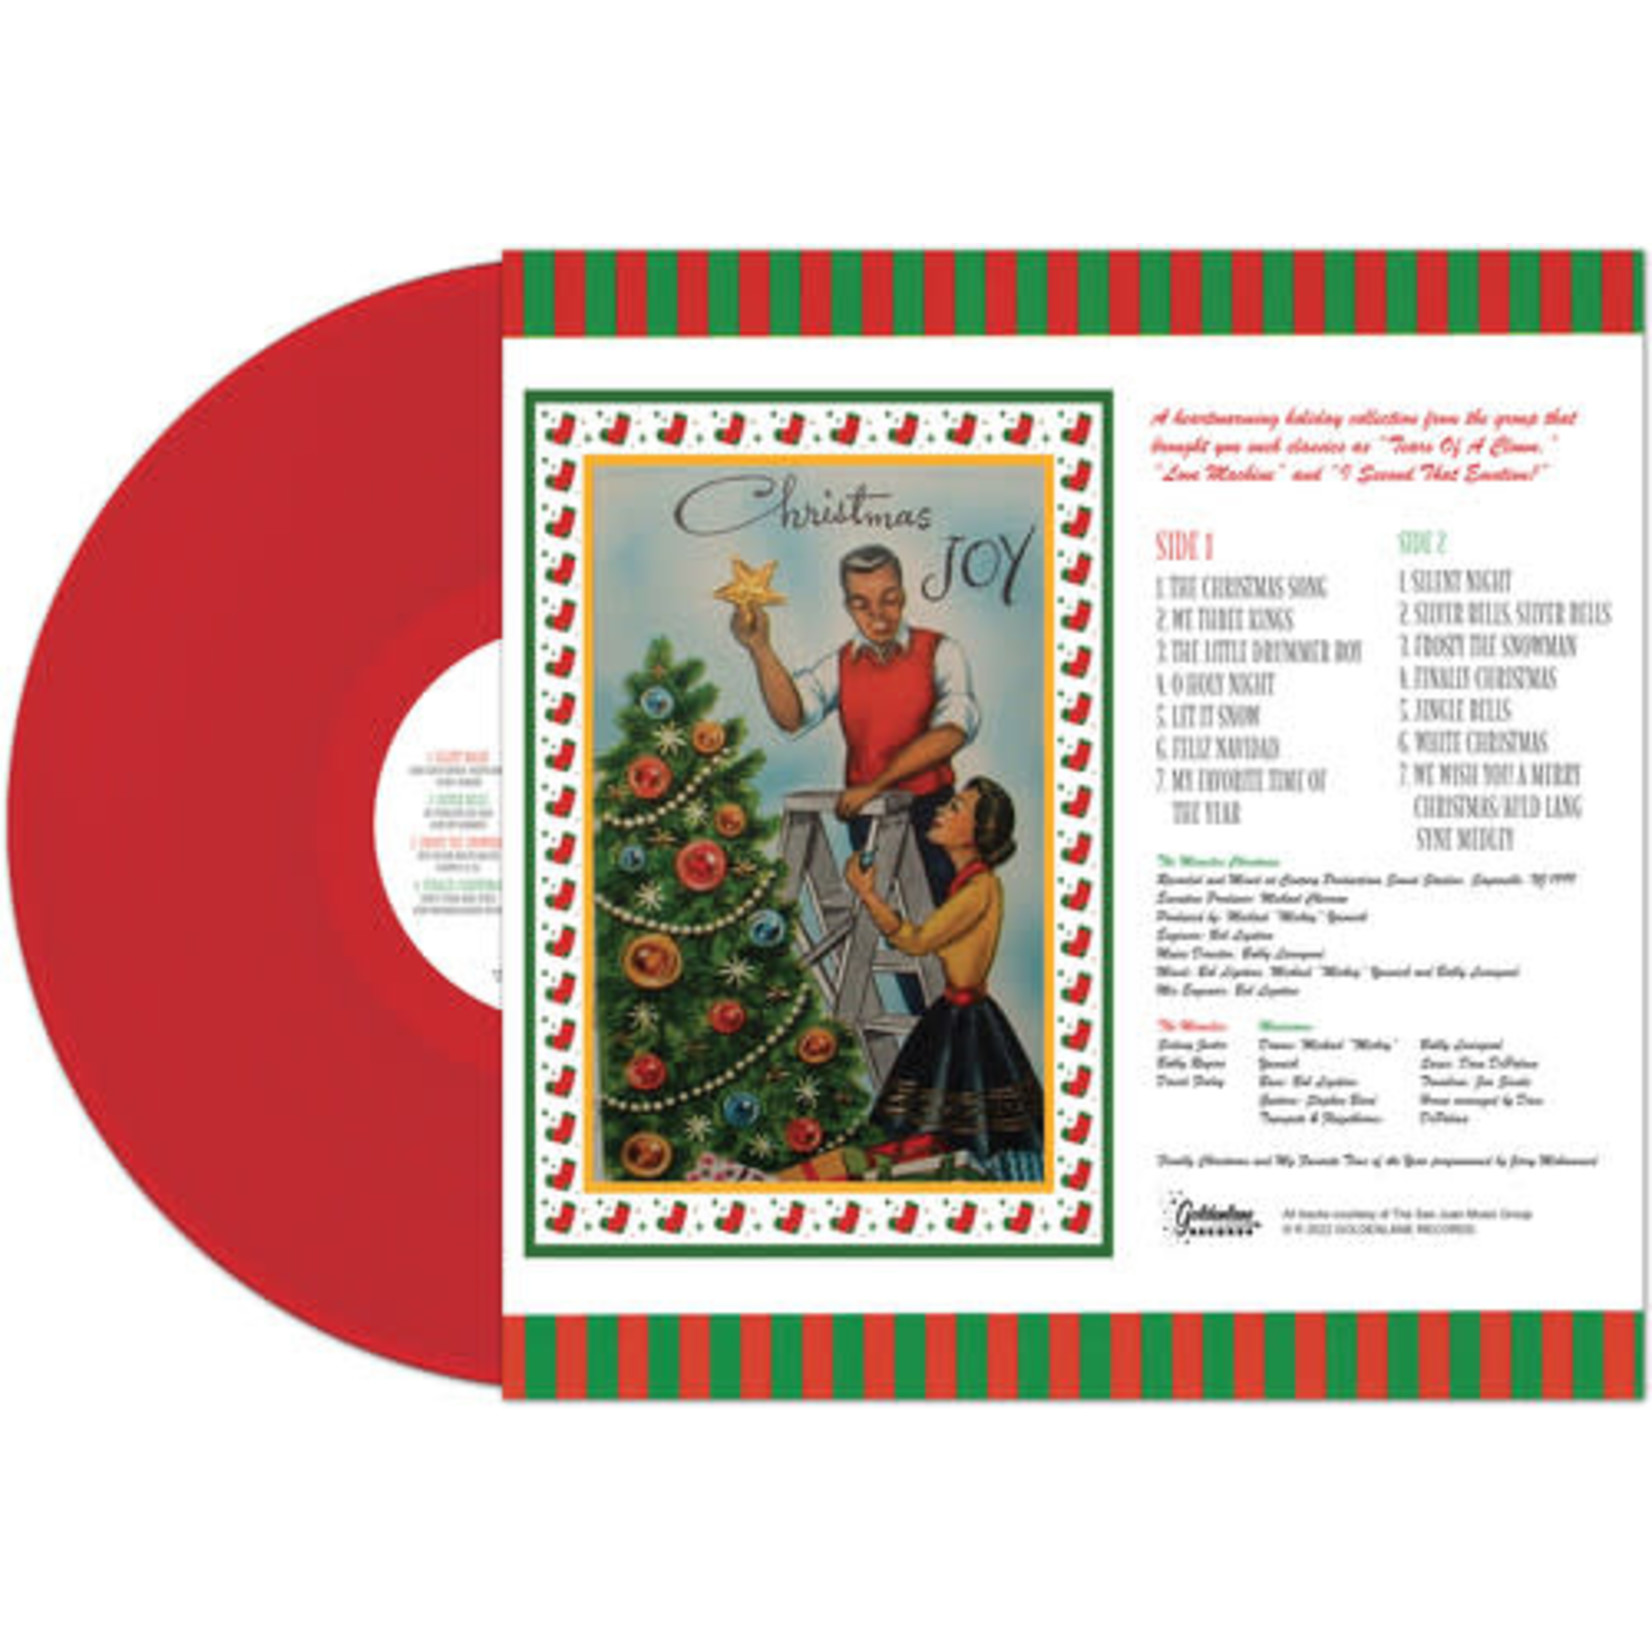 Cleopatra Miracles - A Soulful Christmas (LP) [Red]